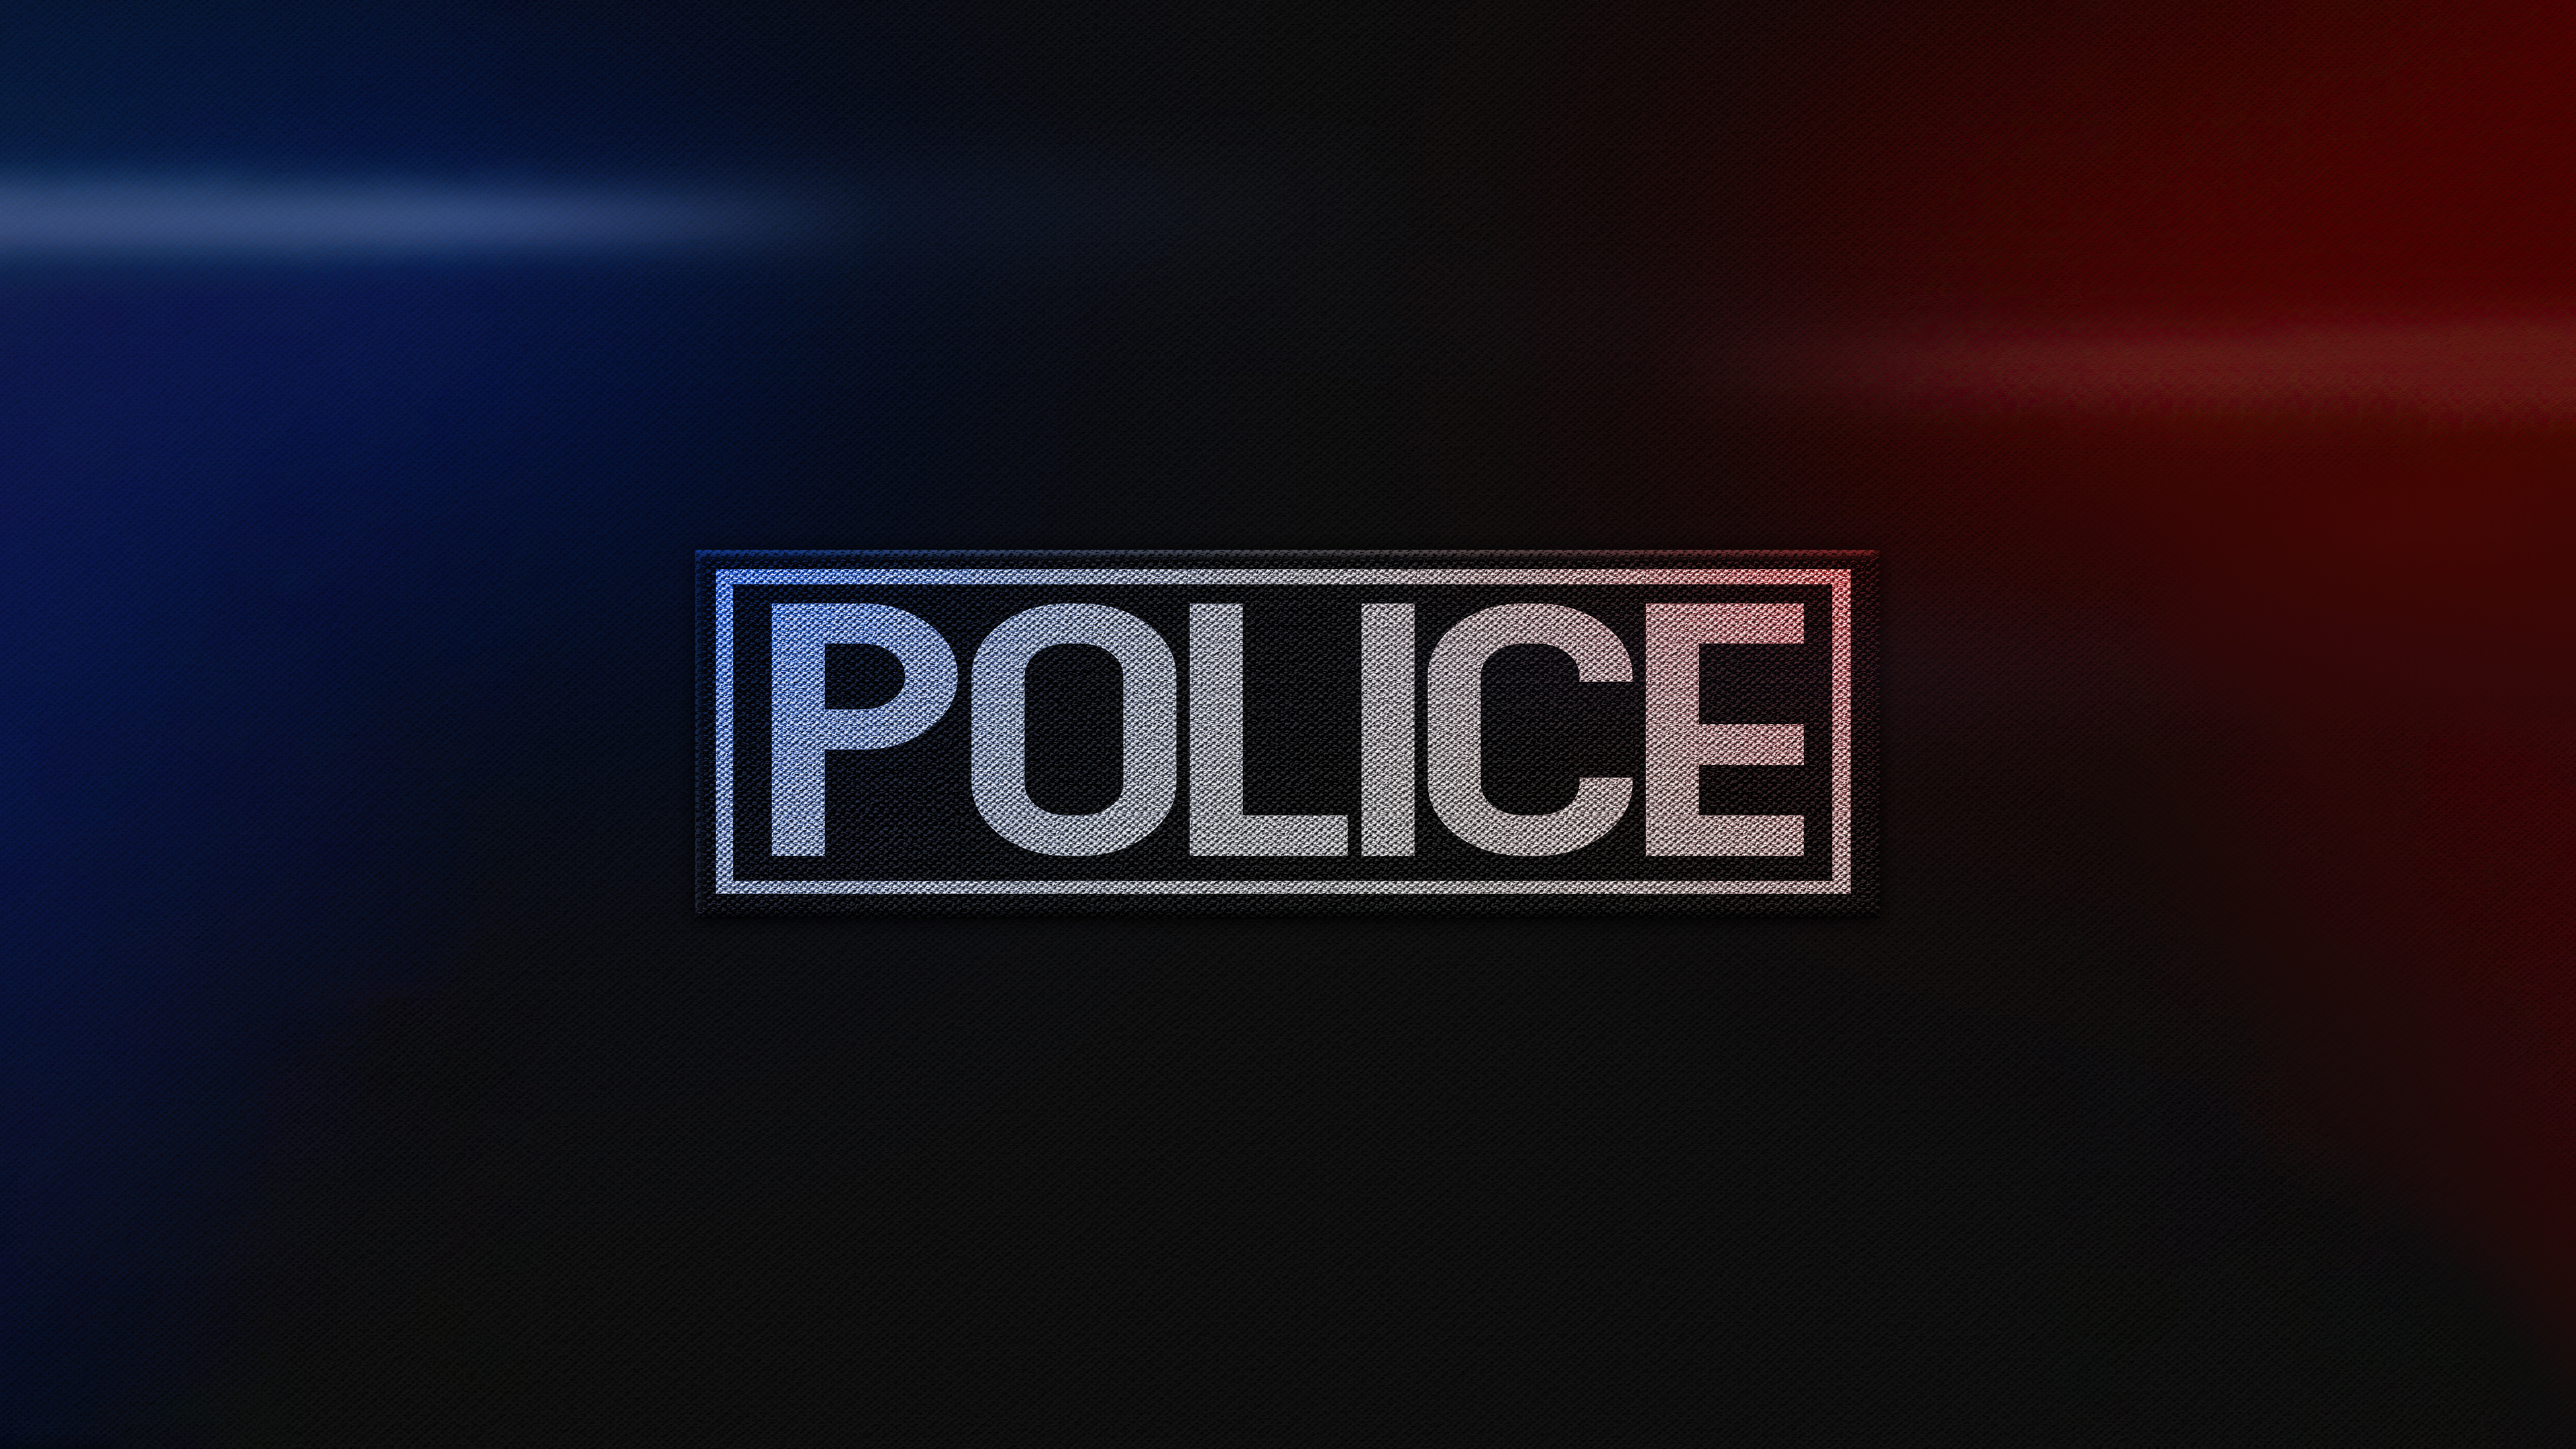 Police 1920X1080 Wallpapers